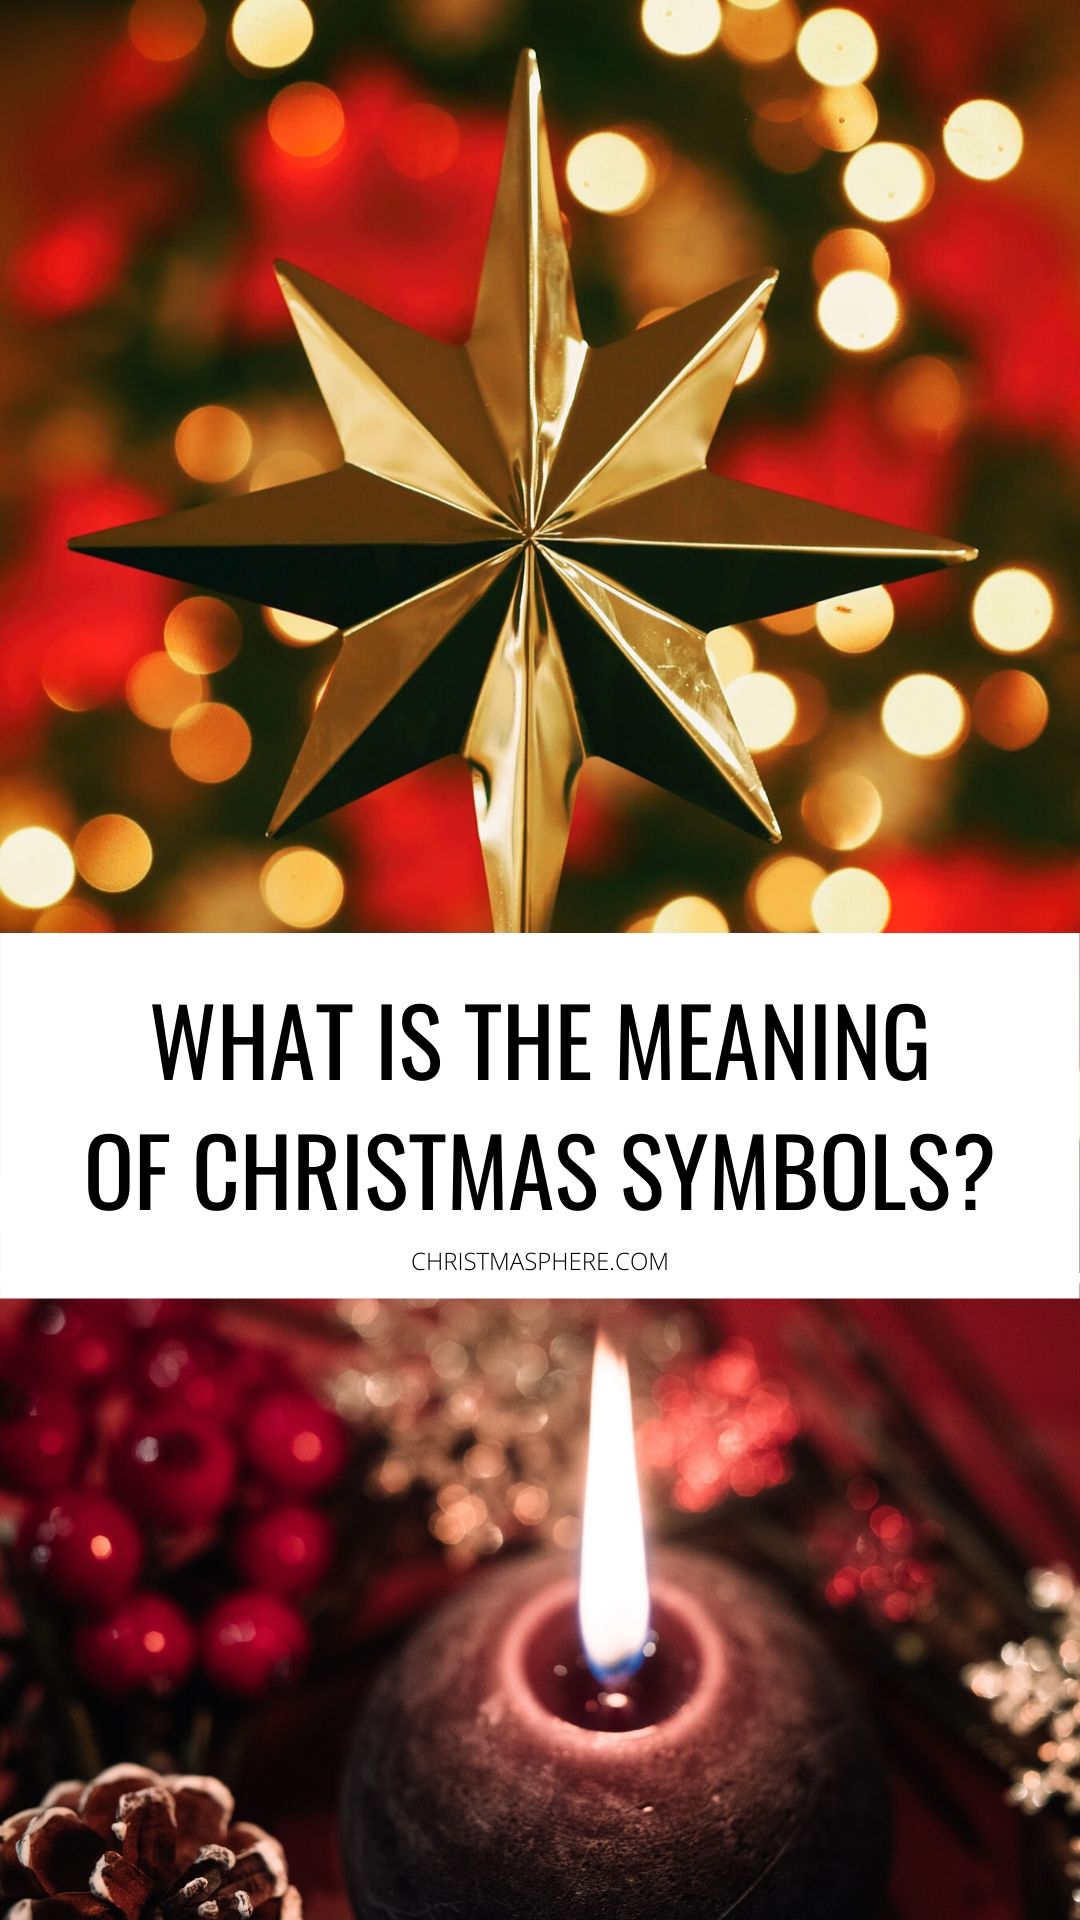 What is the meaning of Christmas symbols